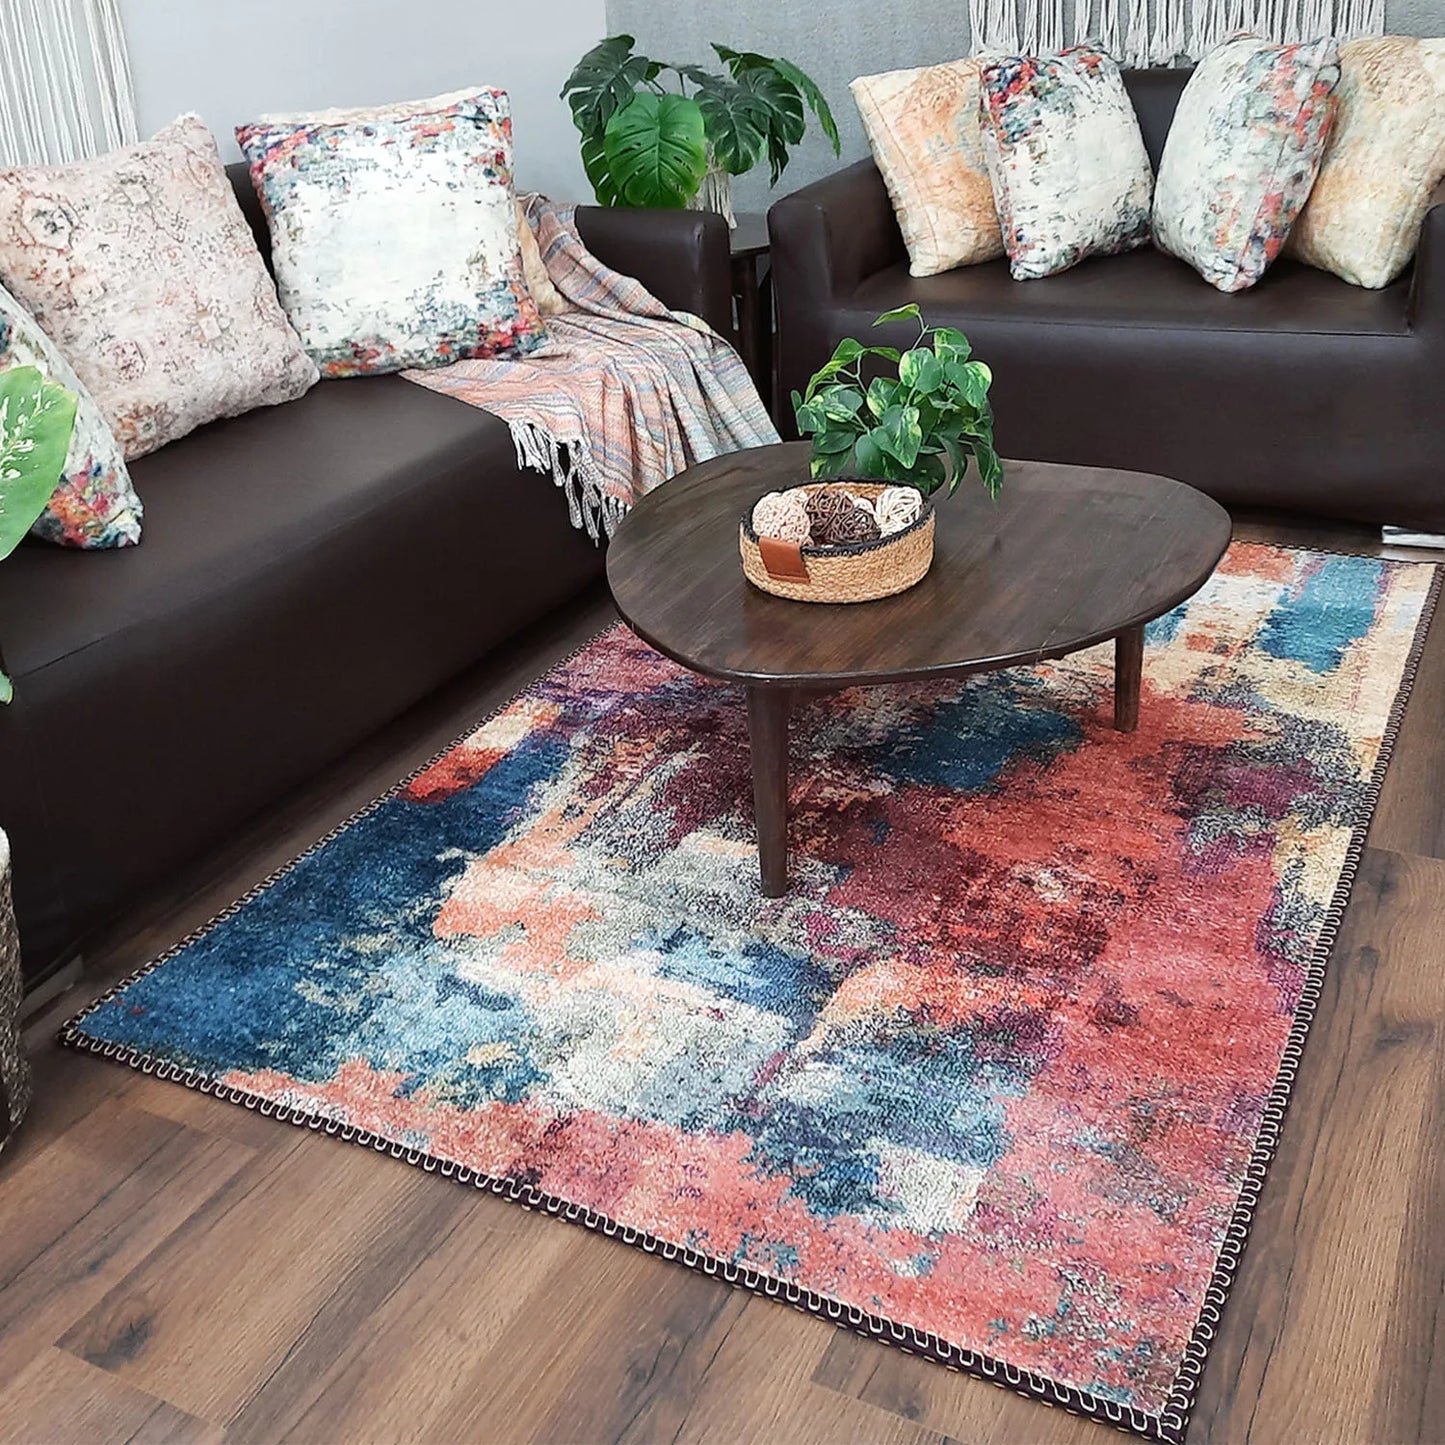 Avioni Home Faux Silk Carpet for Your Living Room | Abstract Elements | Durable and Washable | BrickLane Collection